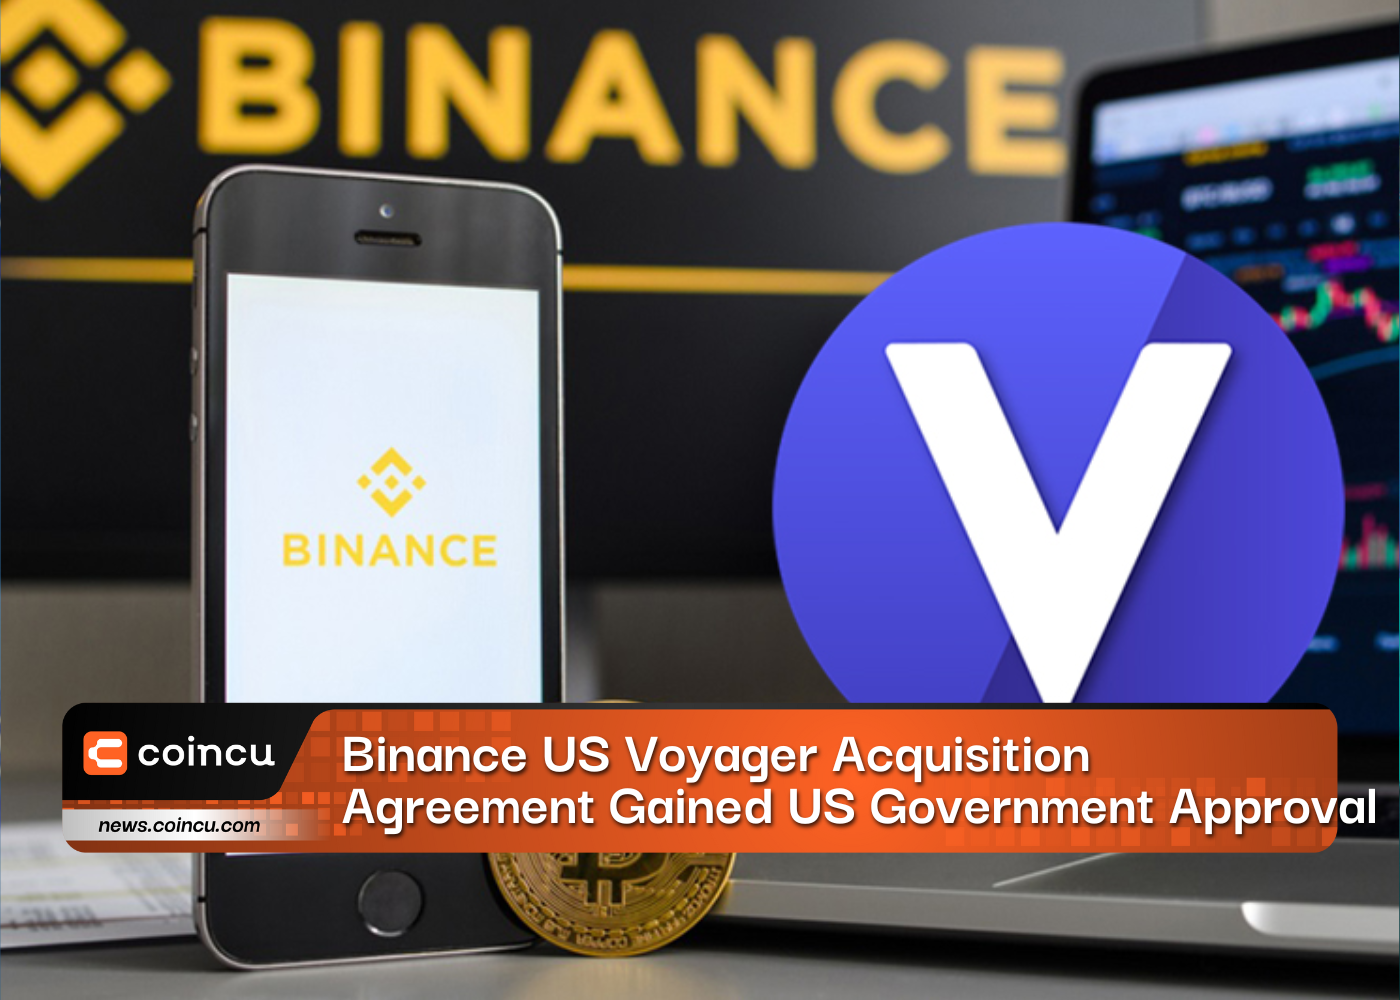 Binance US Voyager Acquisition Agreement Gained US Government Approval